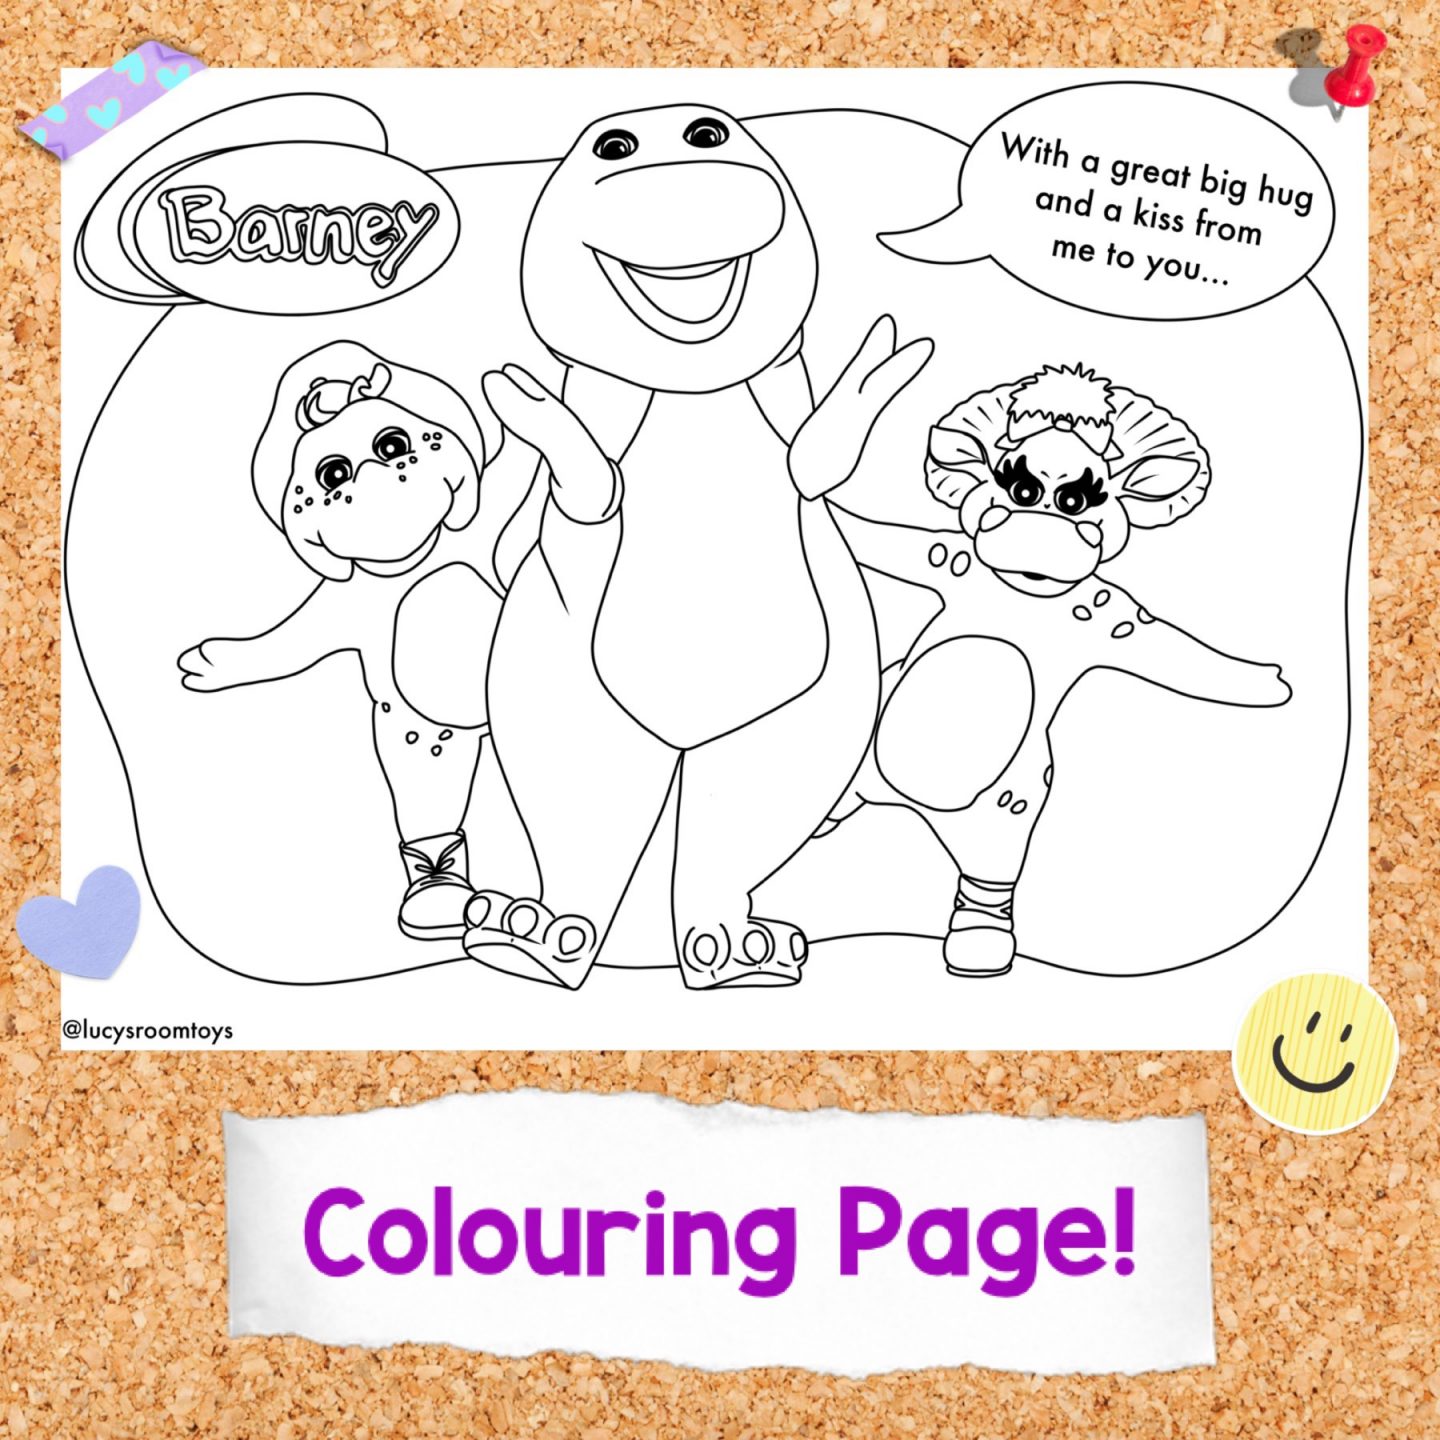 “Barney” Colouring Page